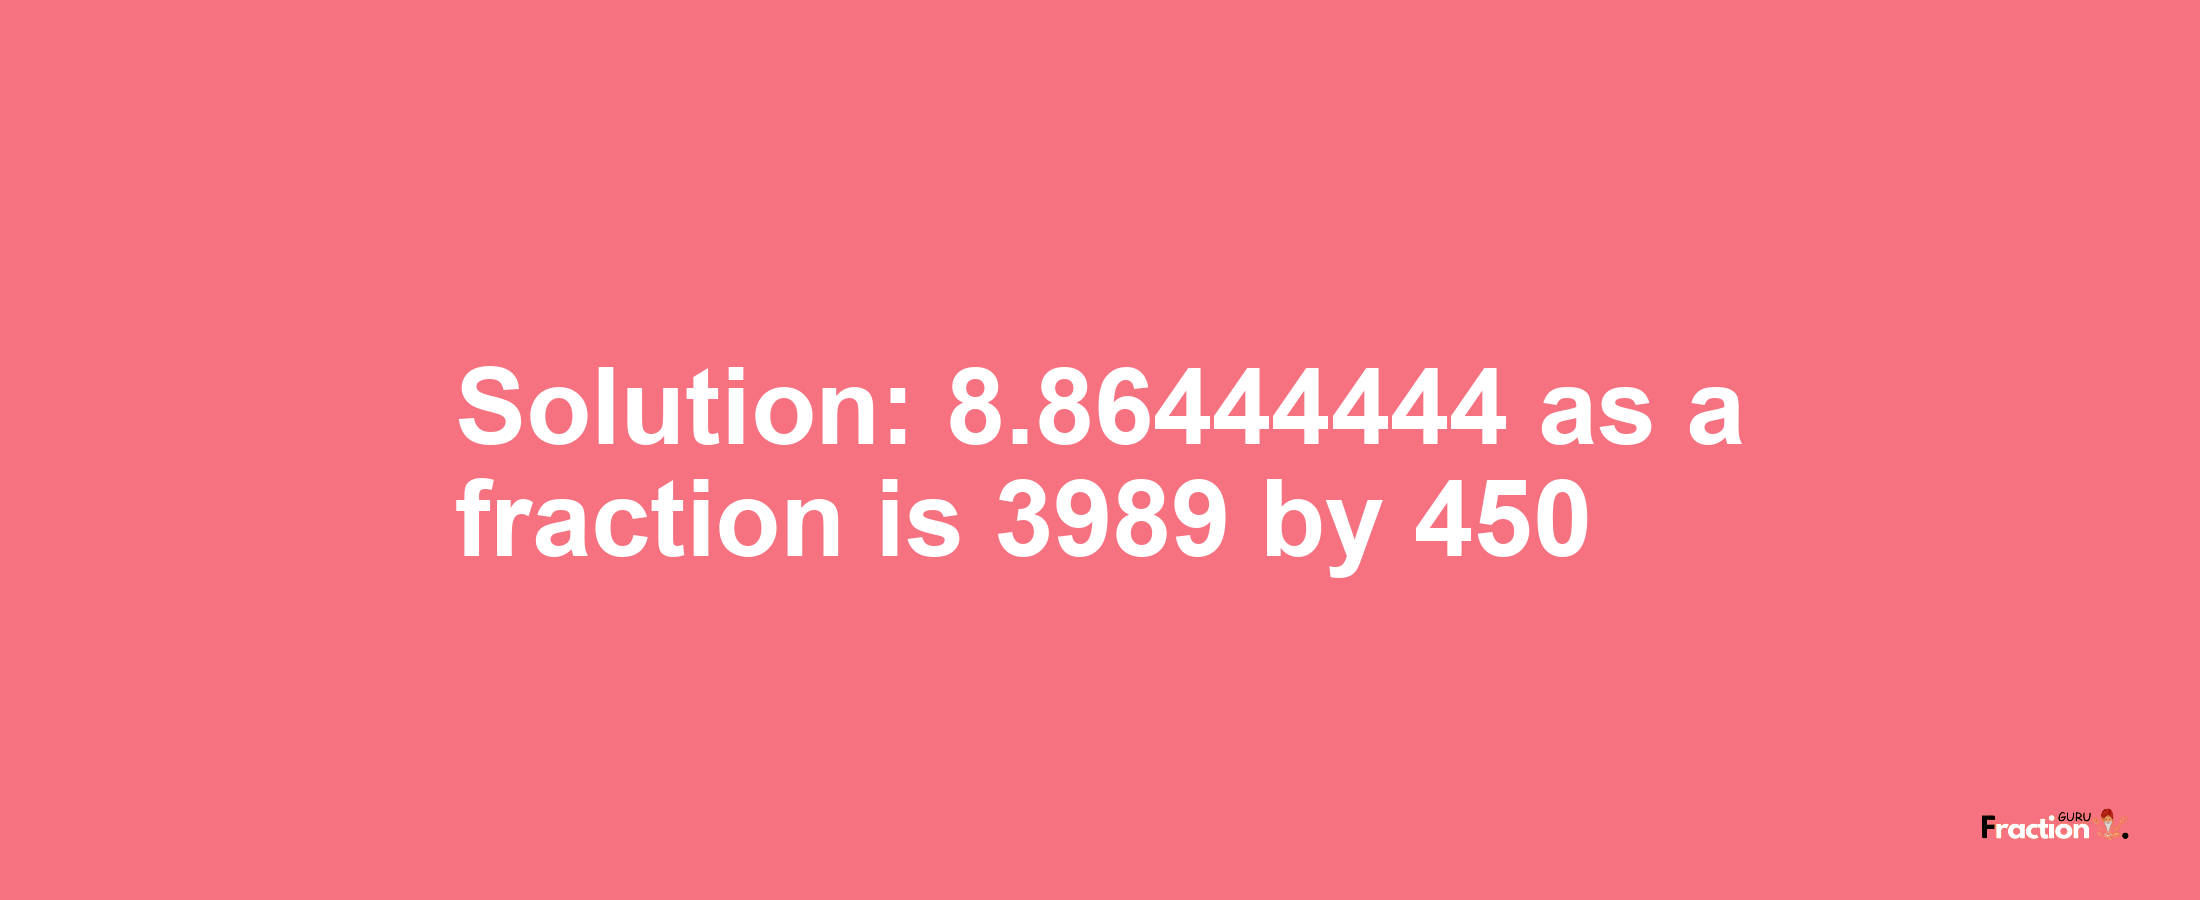 Solution:8.86444444 as a fraction is 3989/450